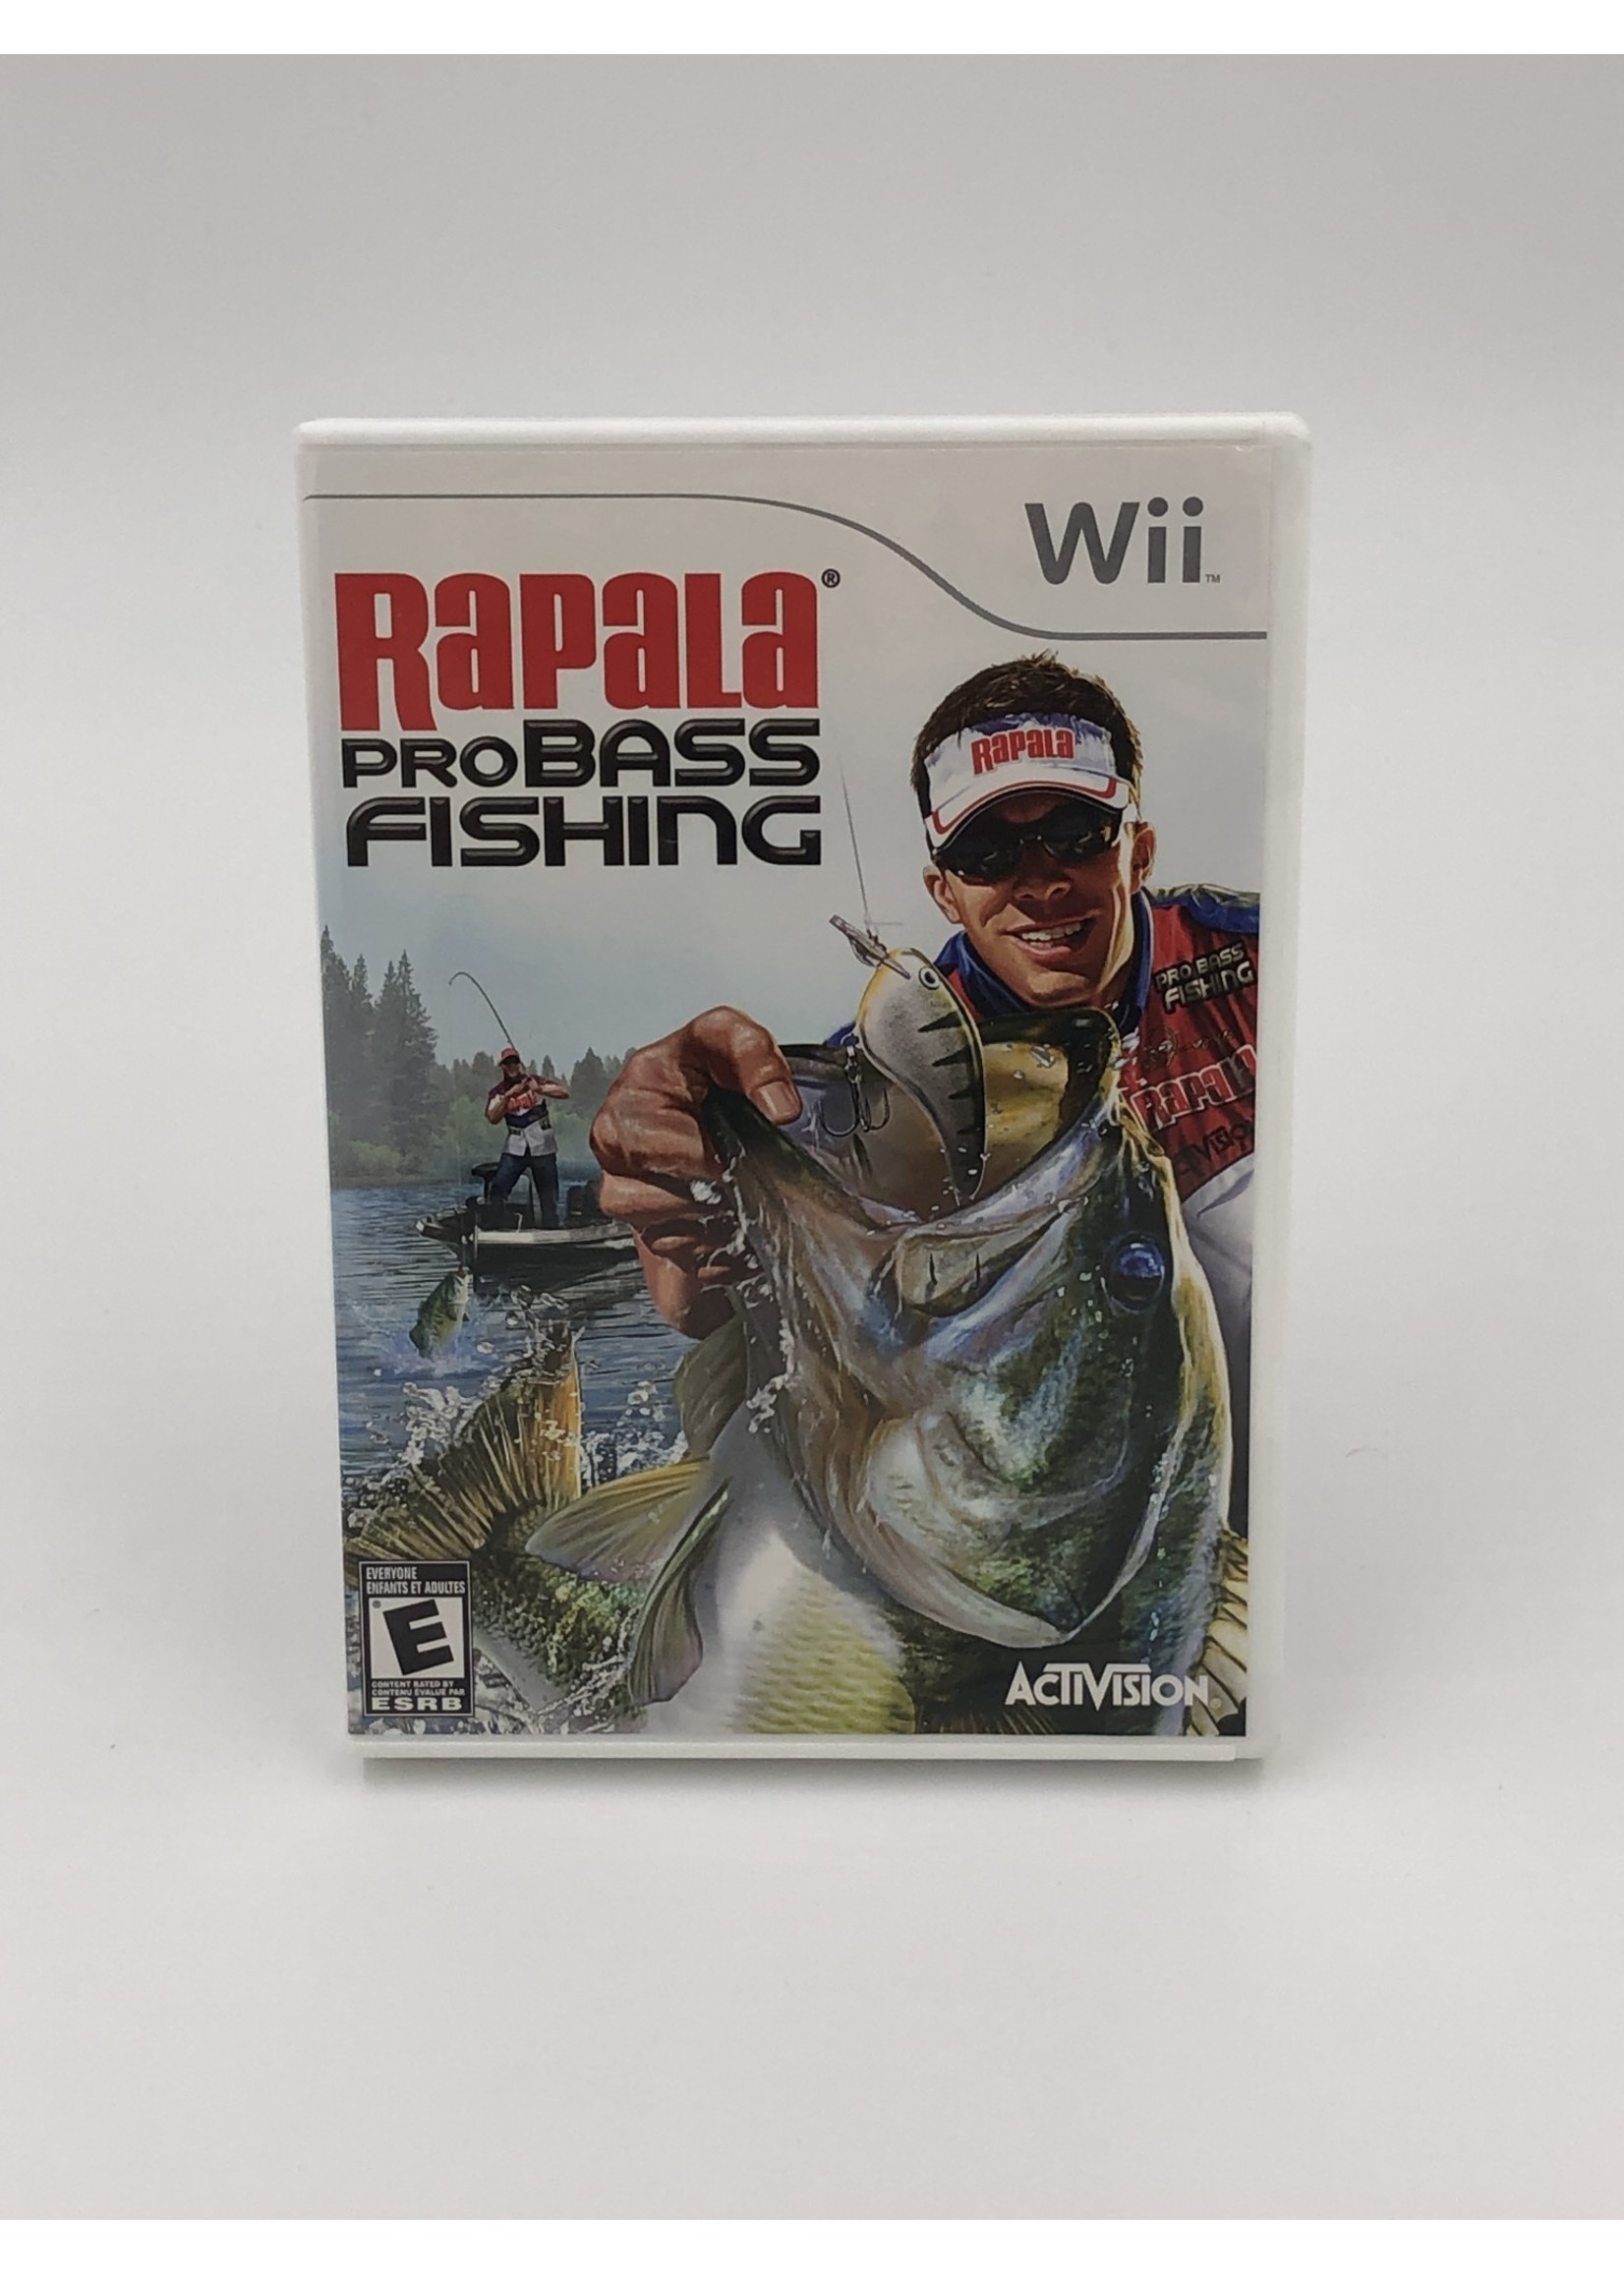 Rapala Pro Bass Fishing - Wii - This N That